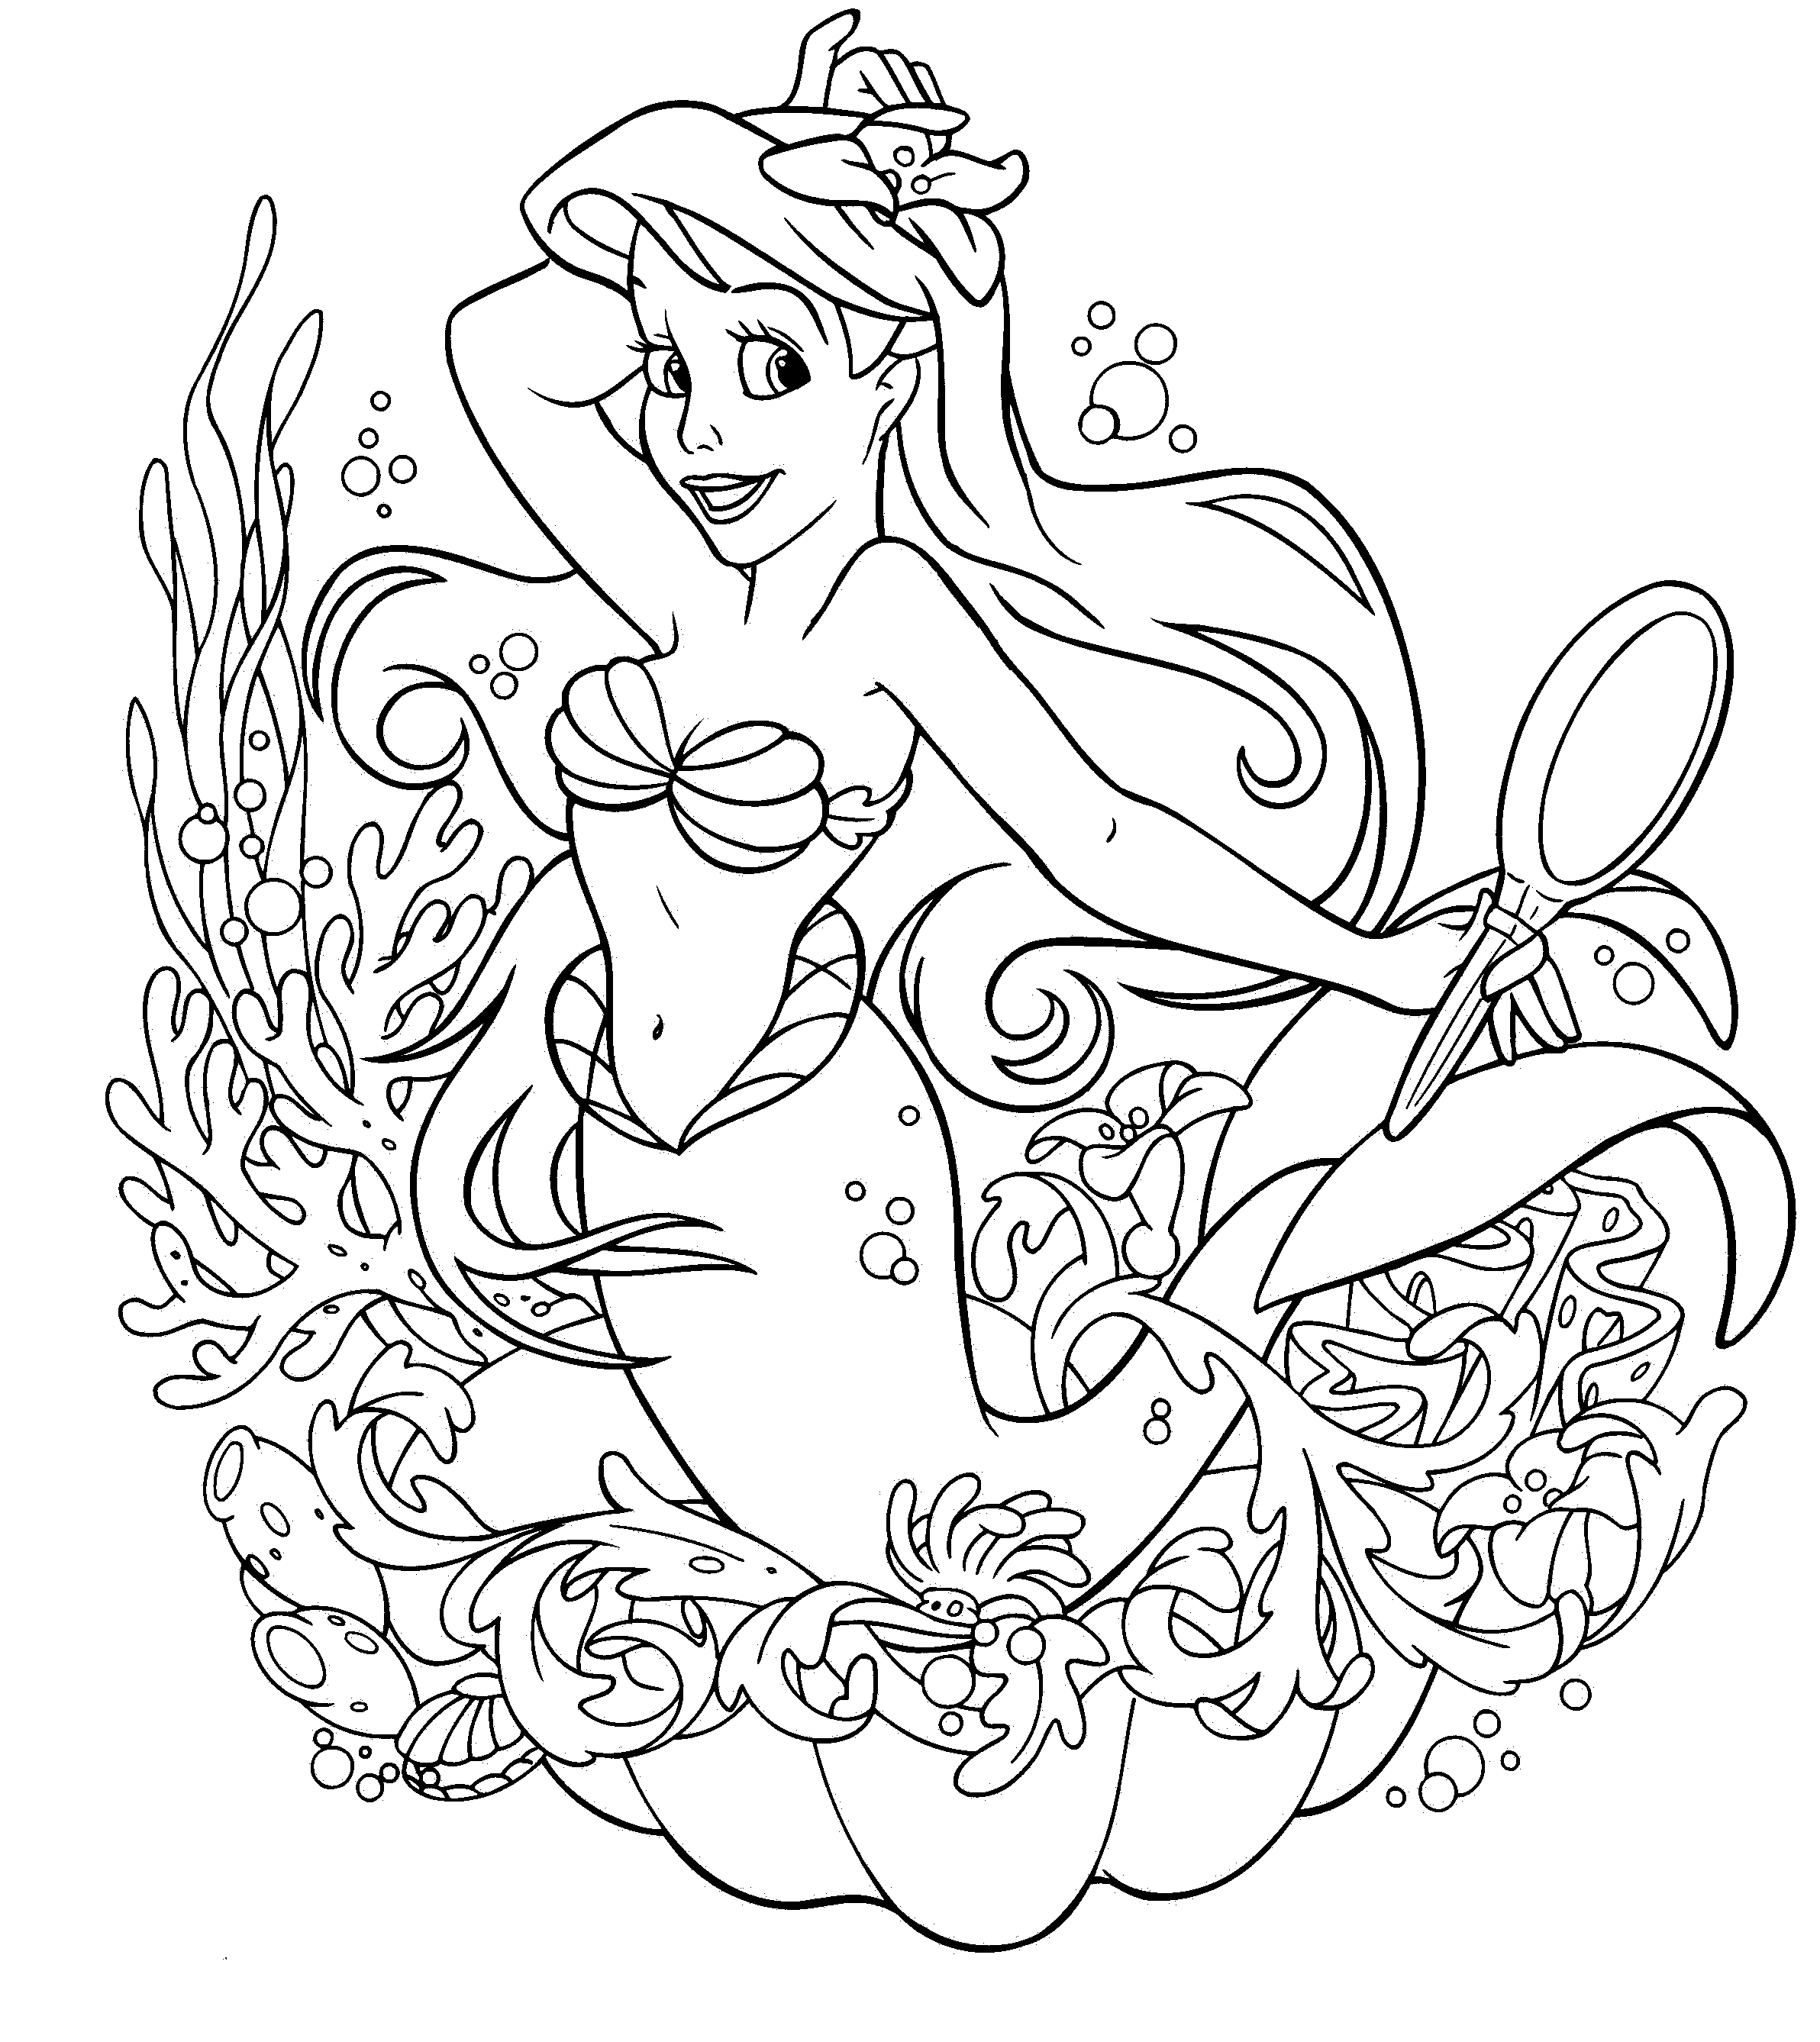 printable coloring sheets for girls strawberry shortcake berrykins coloring pages download and coloring sheets girls for printable 